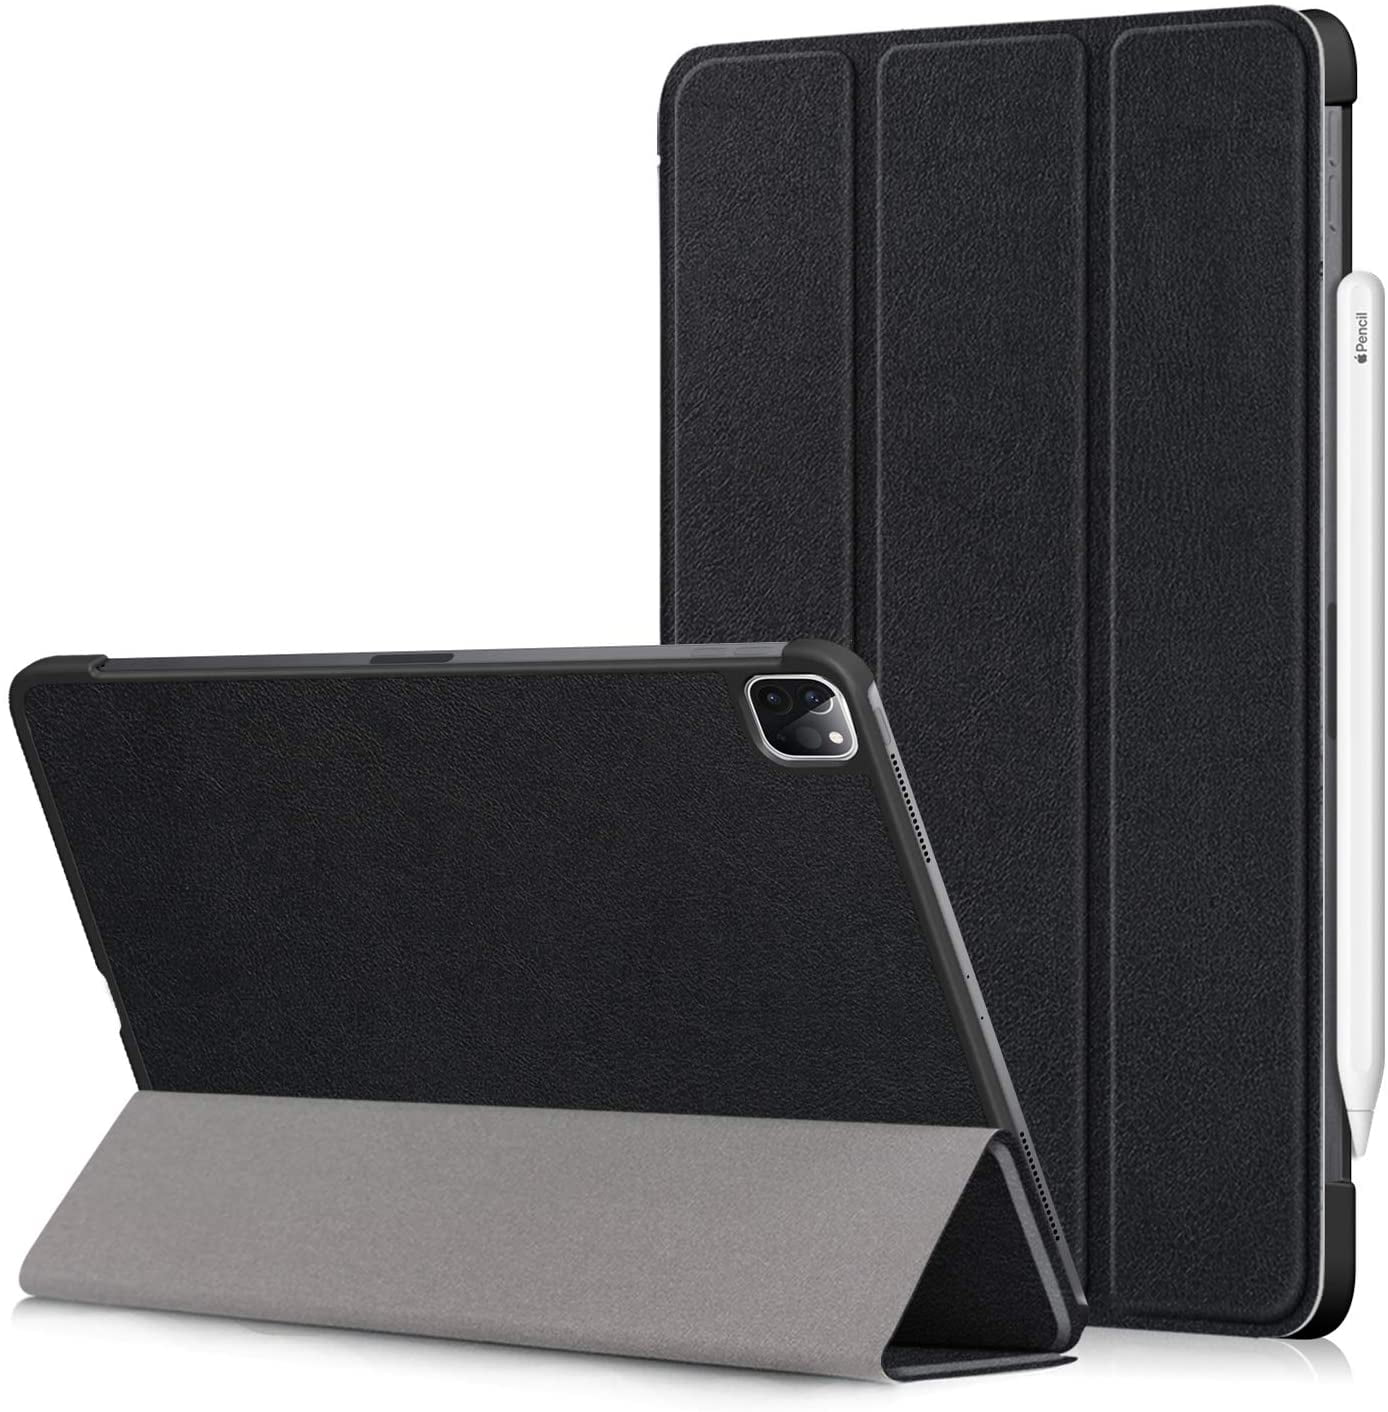 Black Case for iPad Pro 11 2018 Slim Lightweight Trifold Stand Smart Shell with Auto Wake/Sleep Back Cover Support iPad Pencil Charging for iPad Pro 11